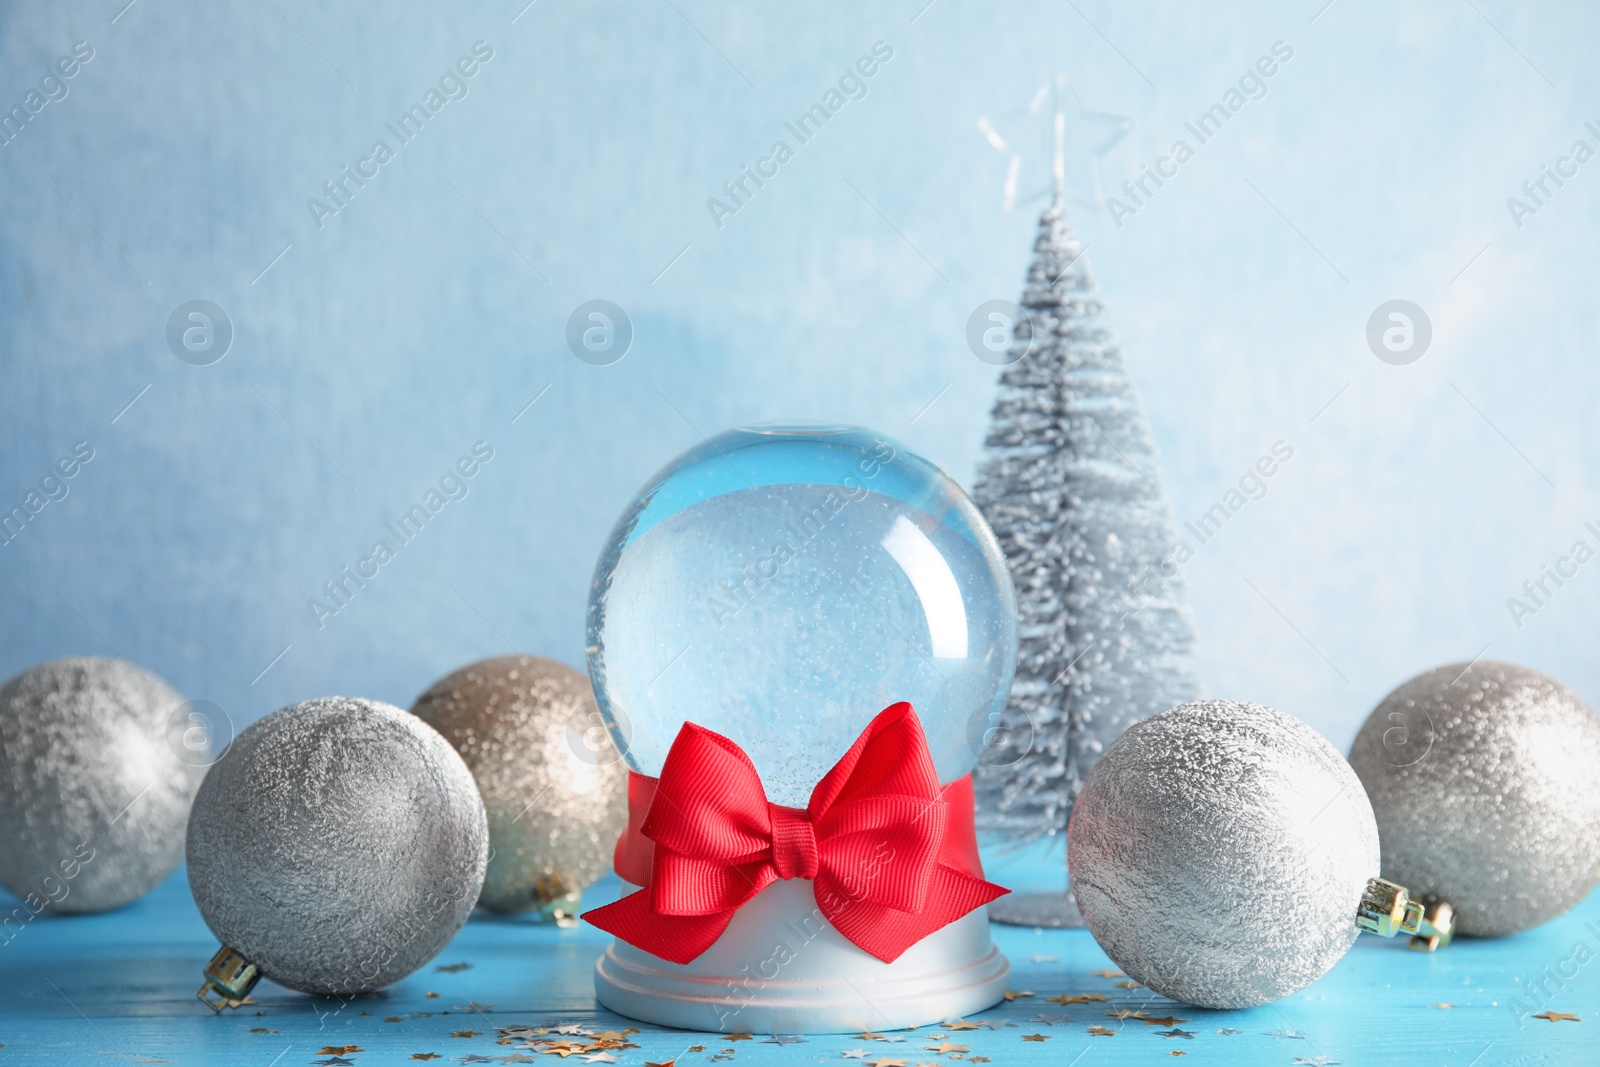 Photo of Empty snow globe with red bow and Christmas decorations on table